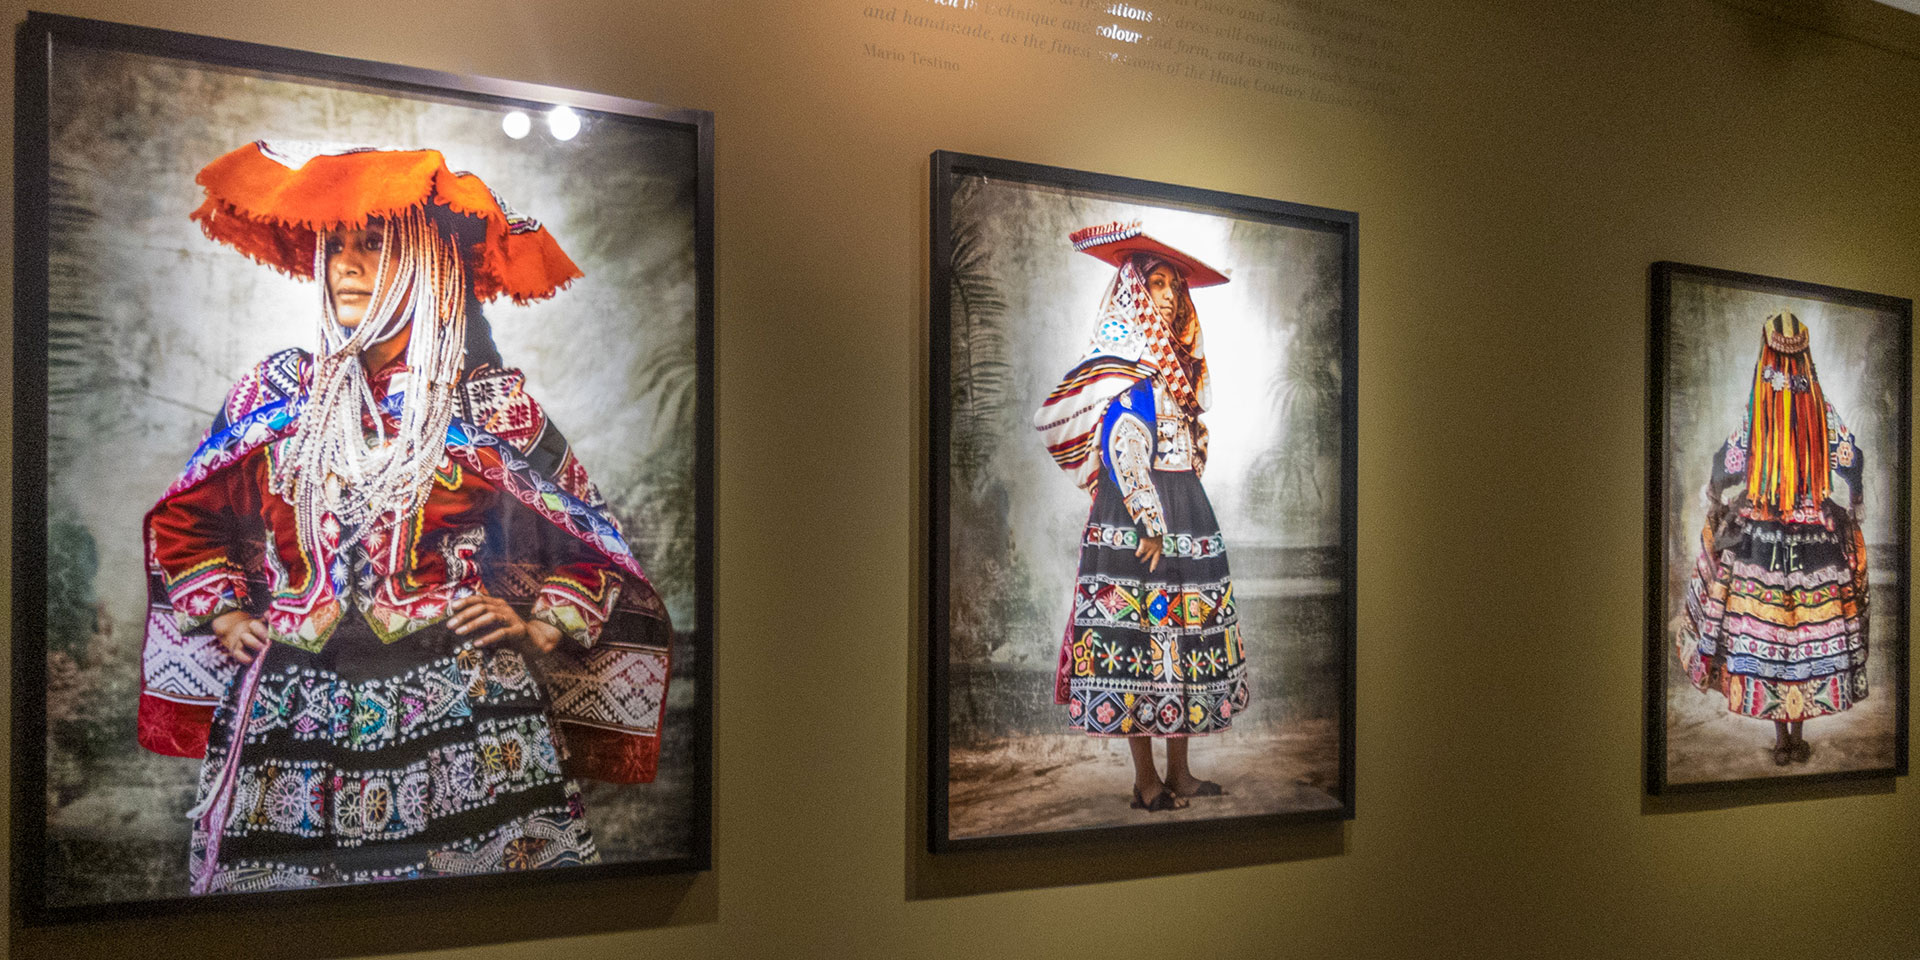 Craving Culture in Lima? Head to the City’s Top Museums